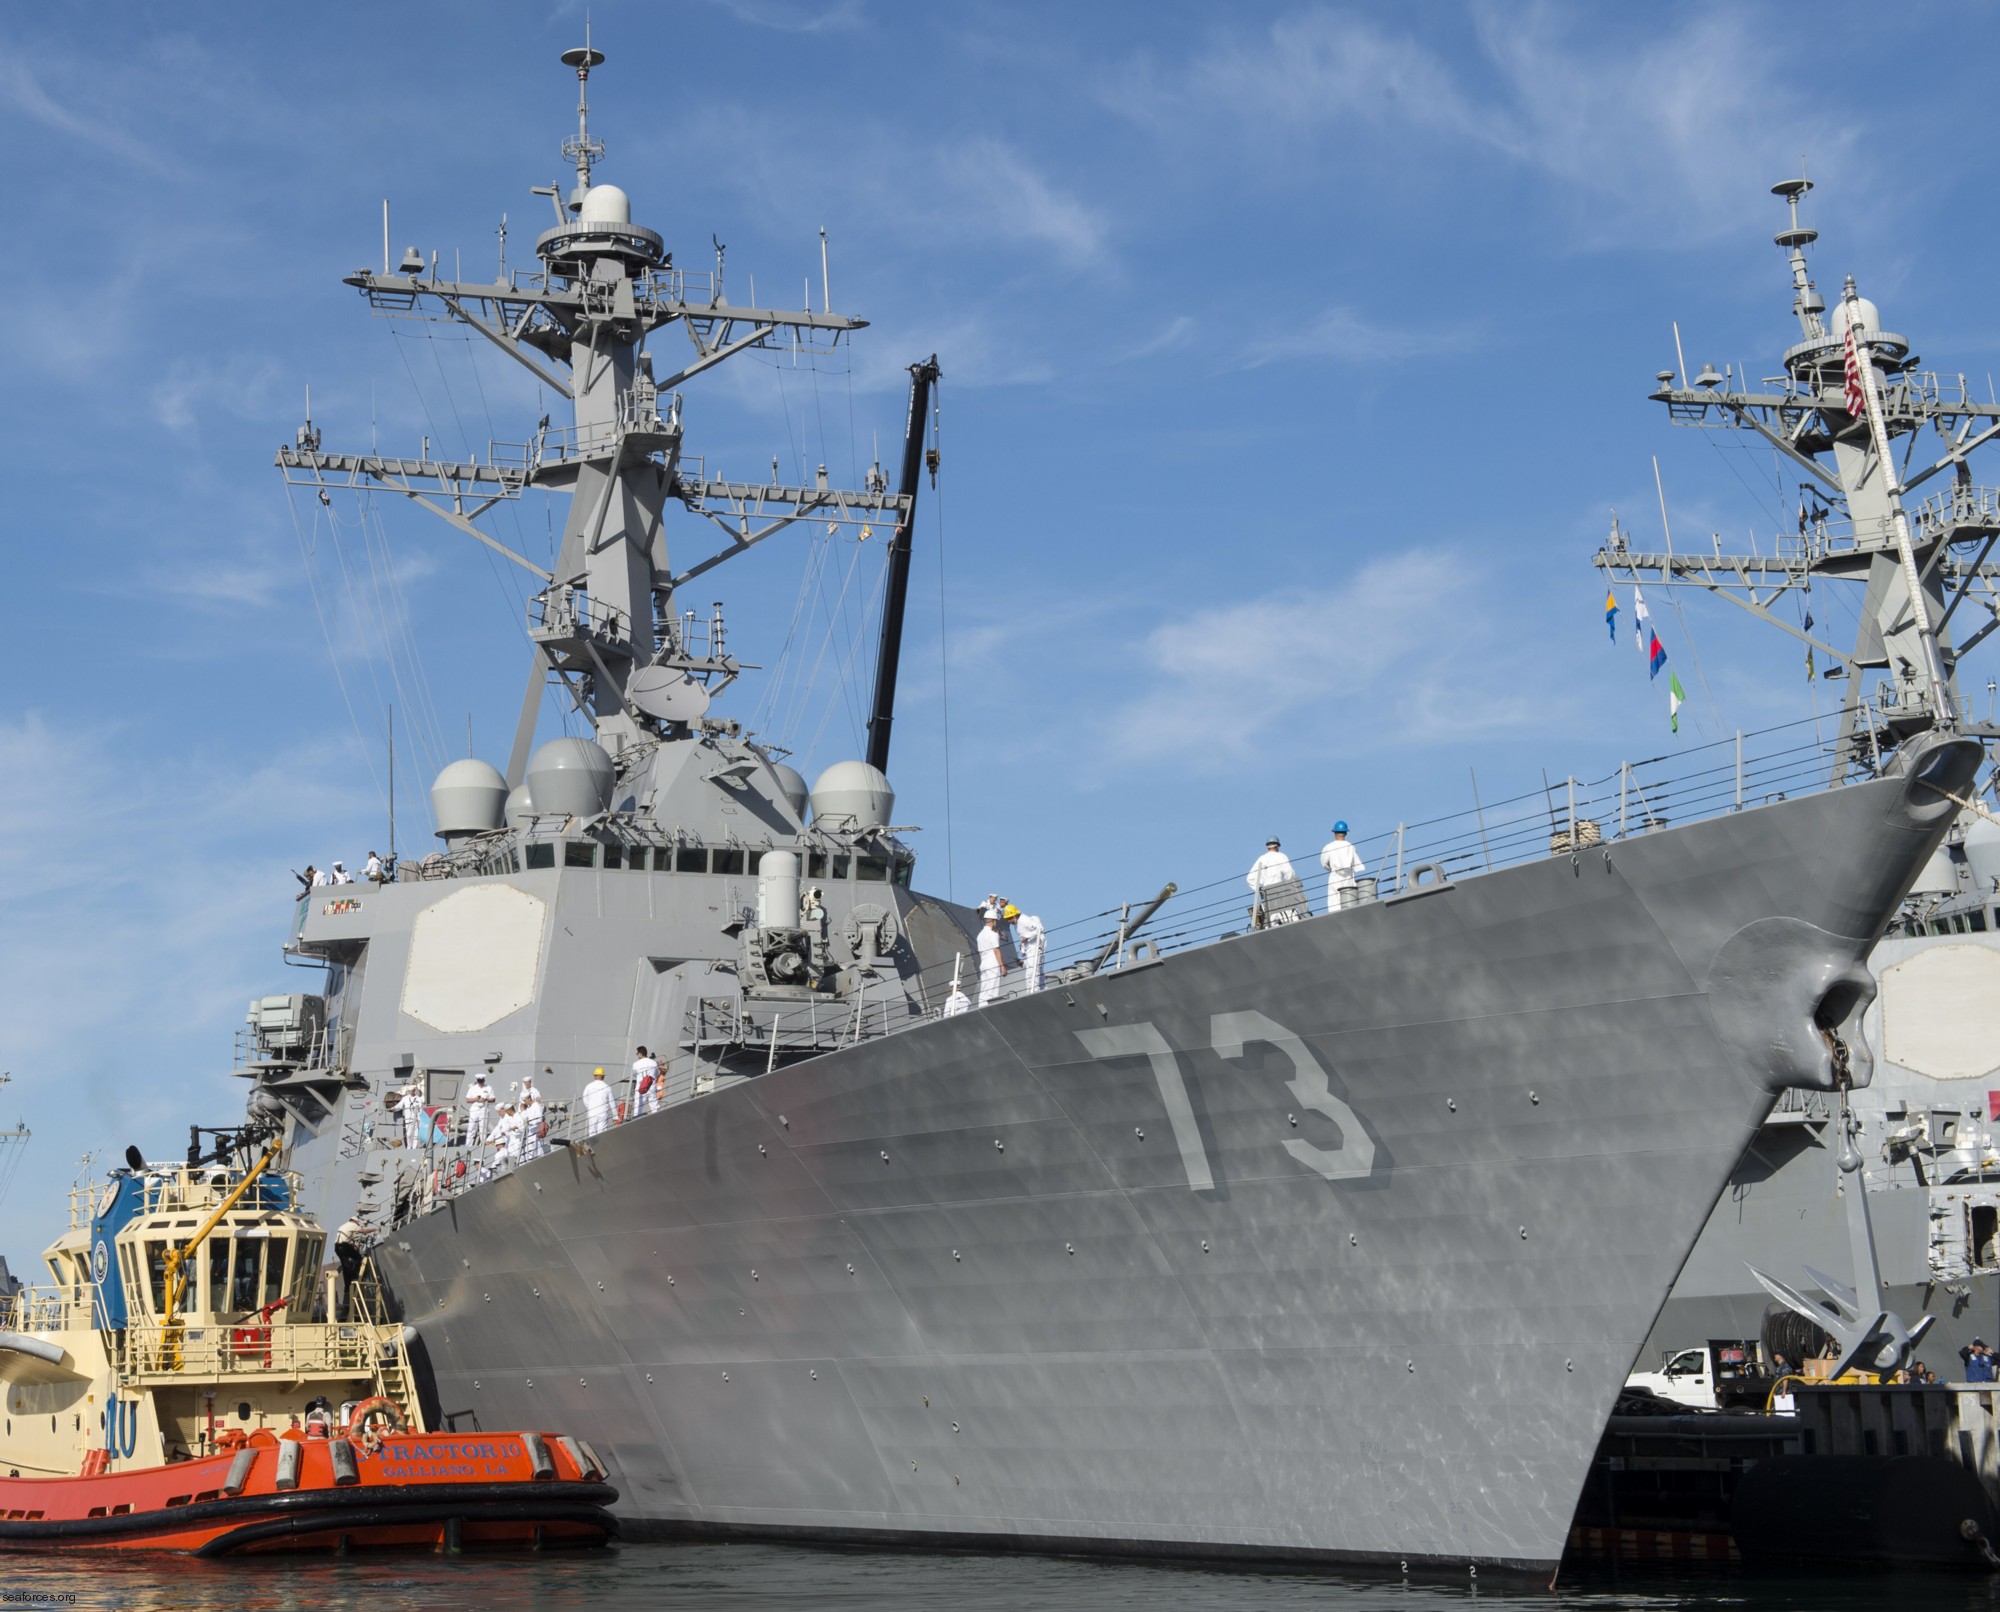 ddg-73 uss decatur guided missile destroyer arleigh burke class aegis bmd 17 san diego naval base